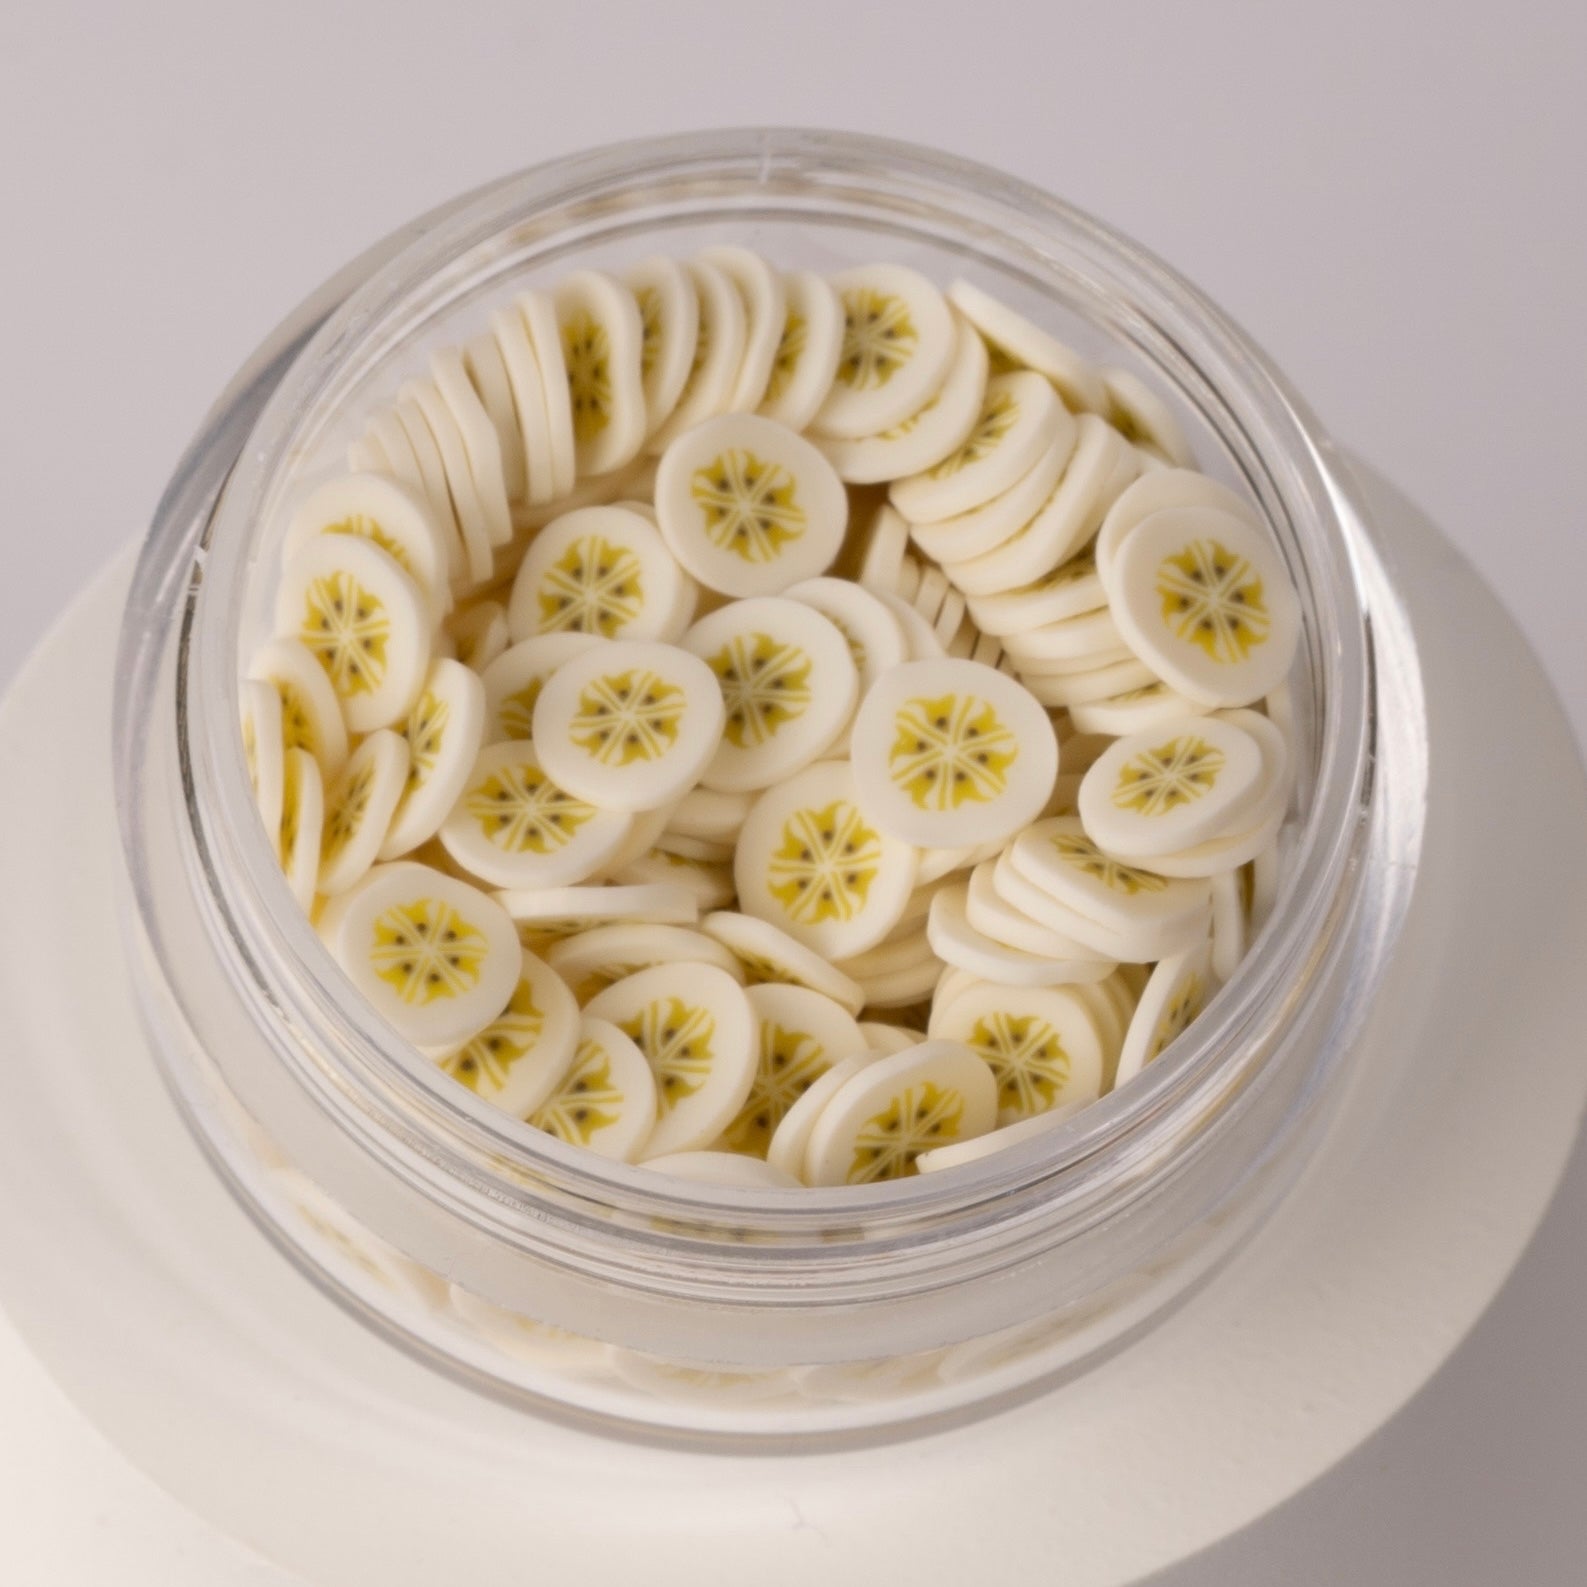 Mini banana slices in clear jar on white background.